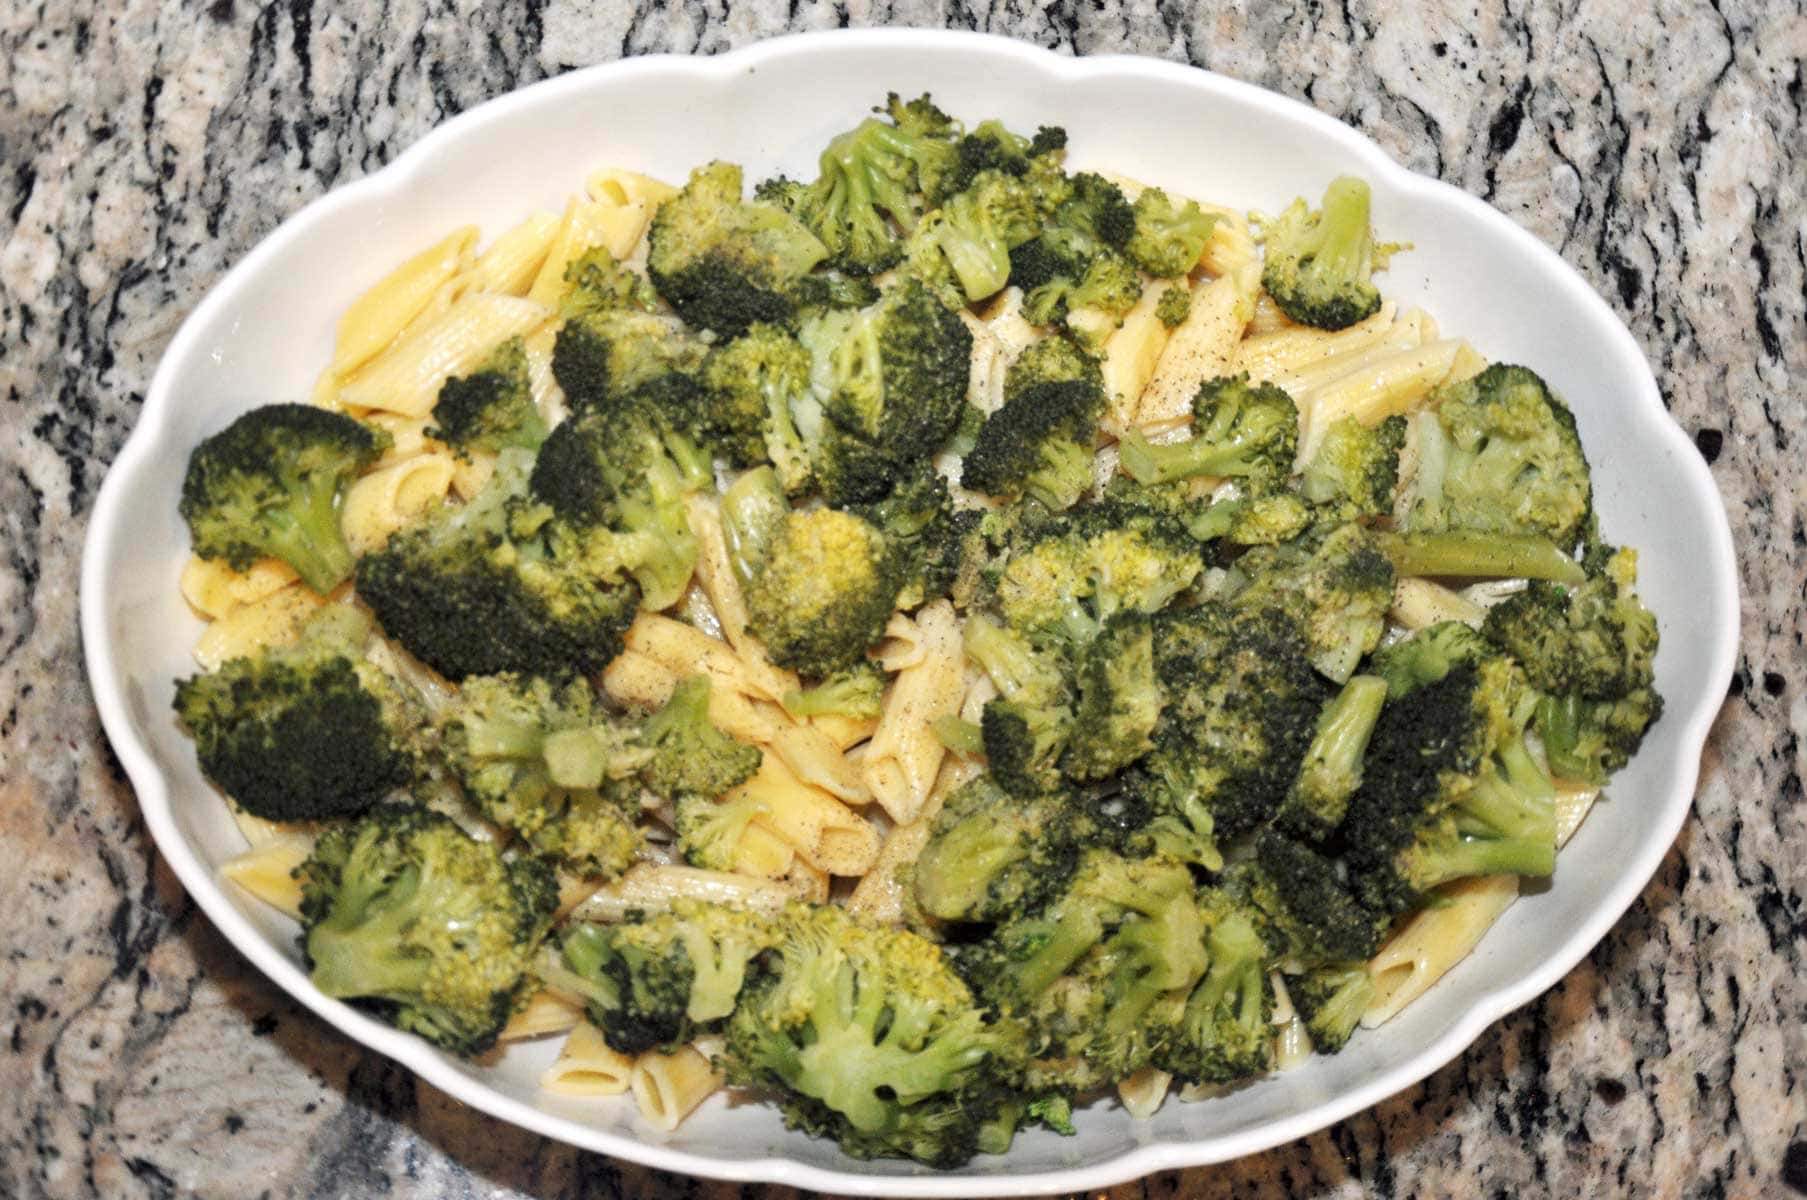 Steamed broccoli and pasta.